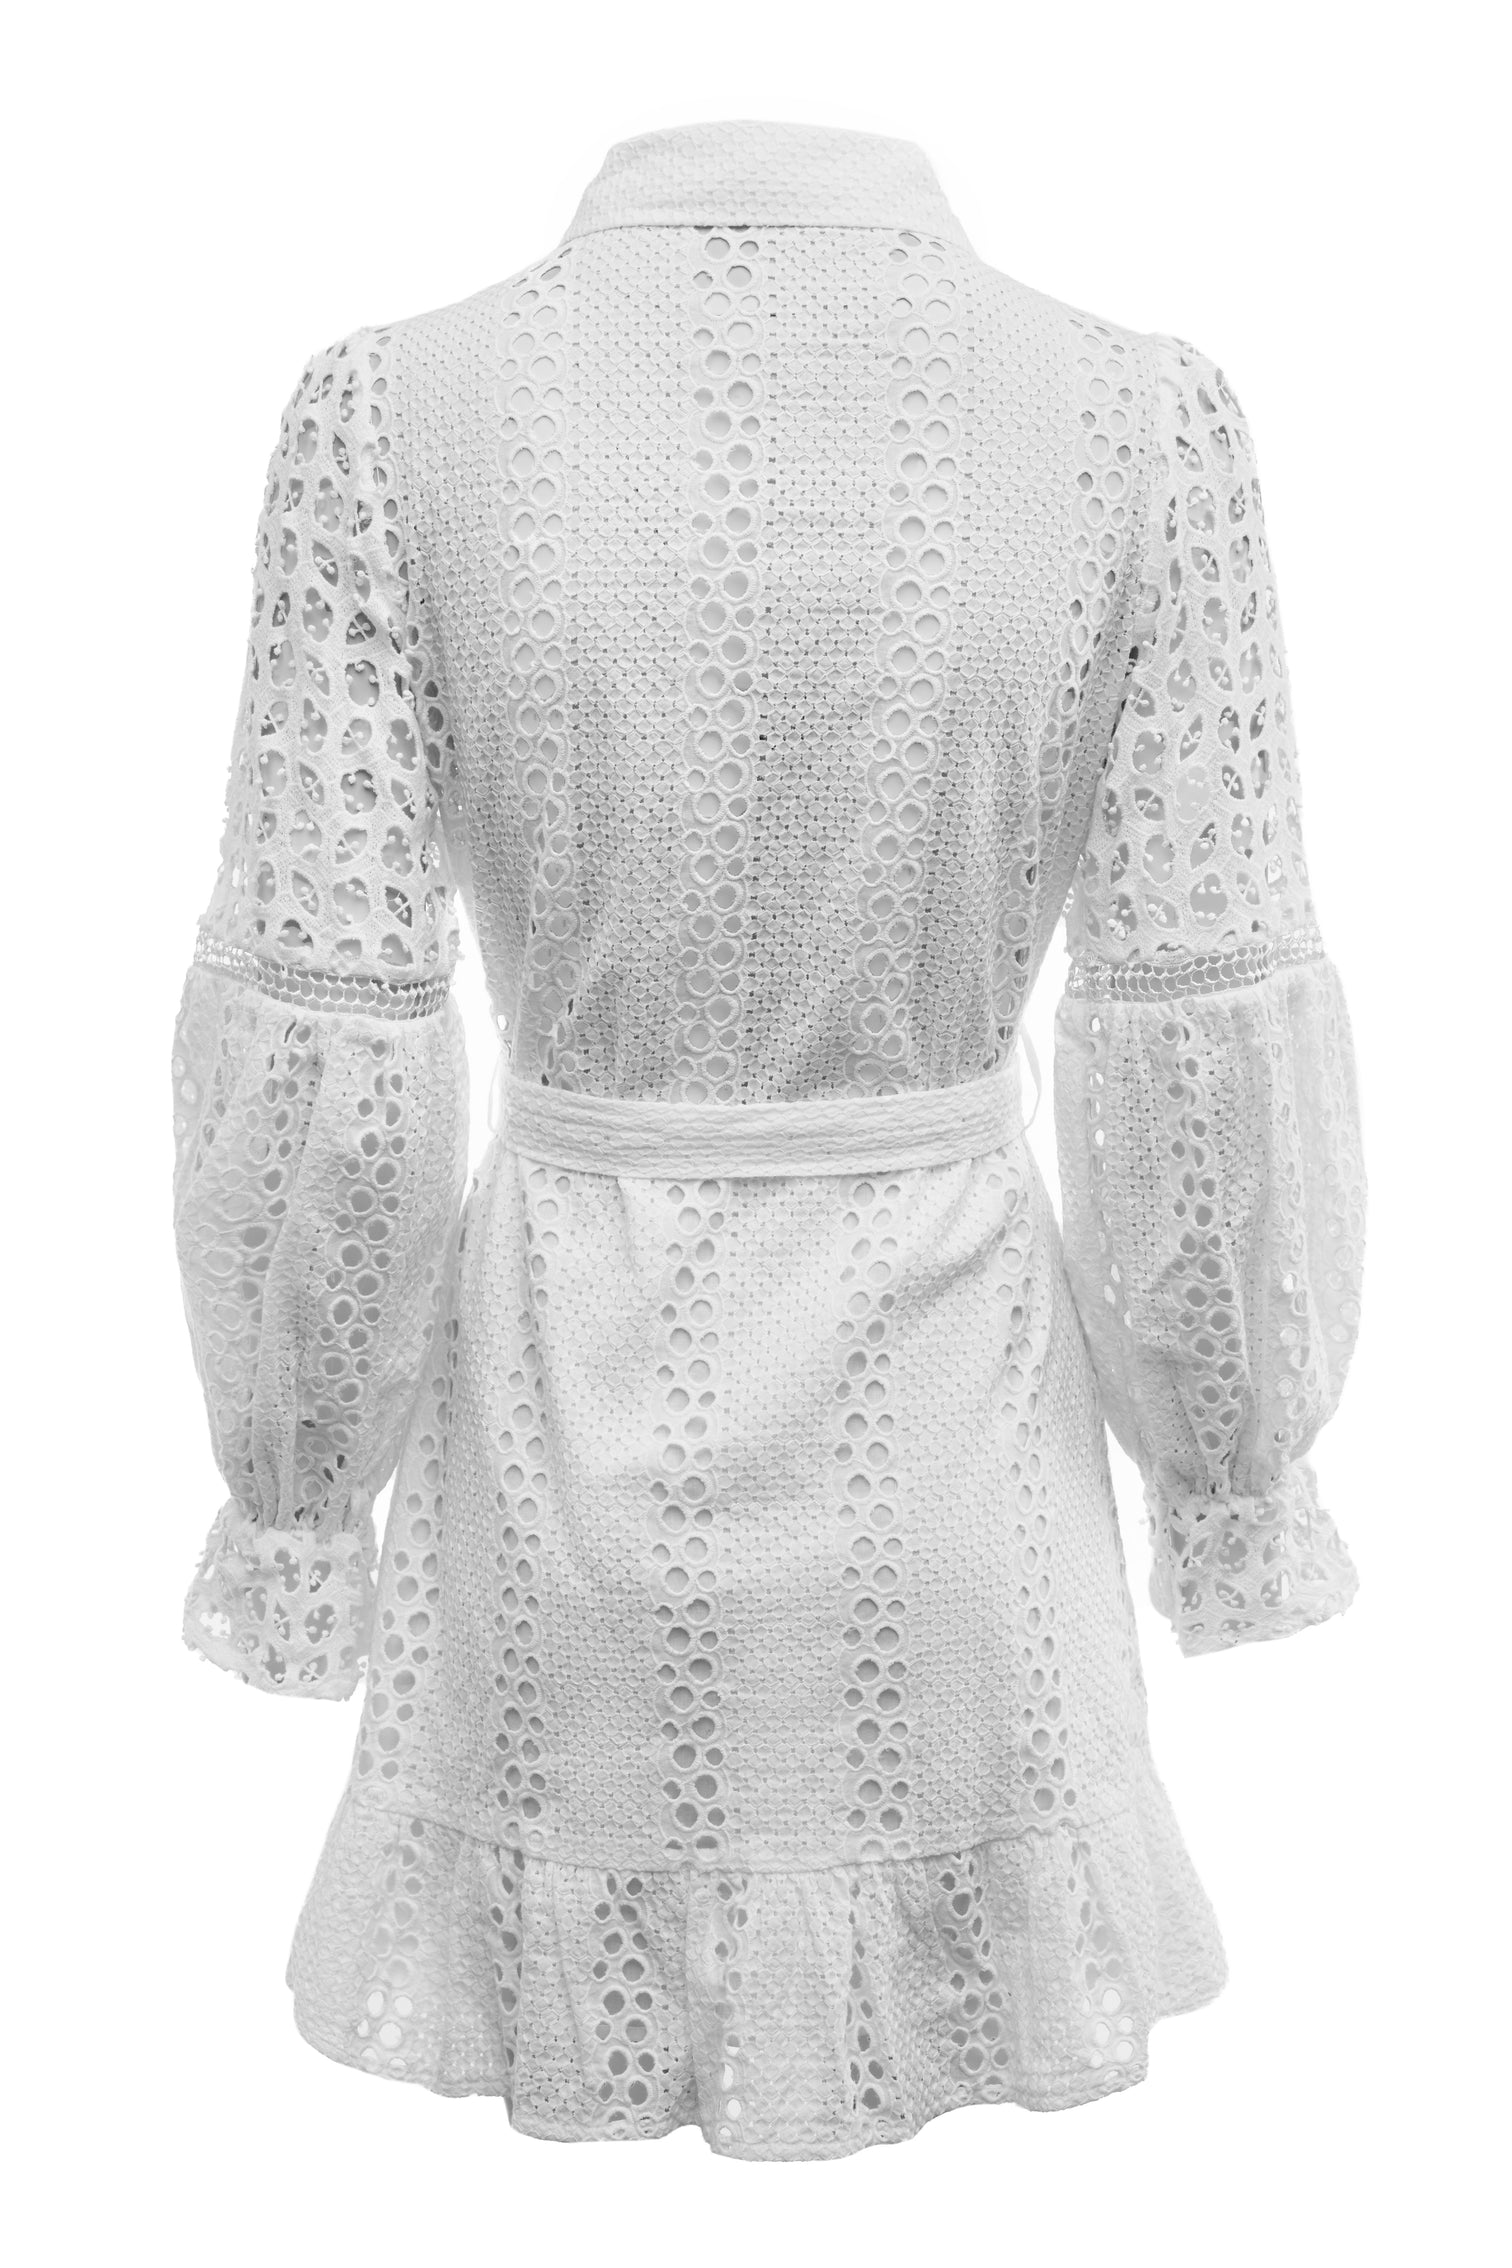 Broderie Lace Dress (White) – Holland Cooper